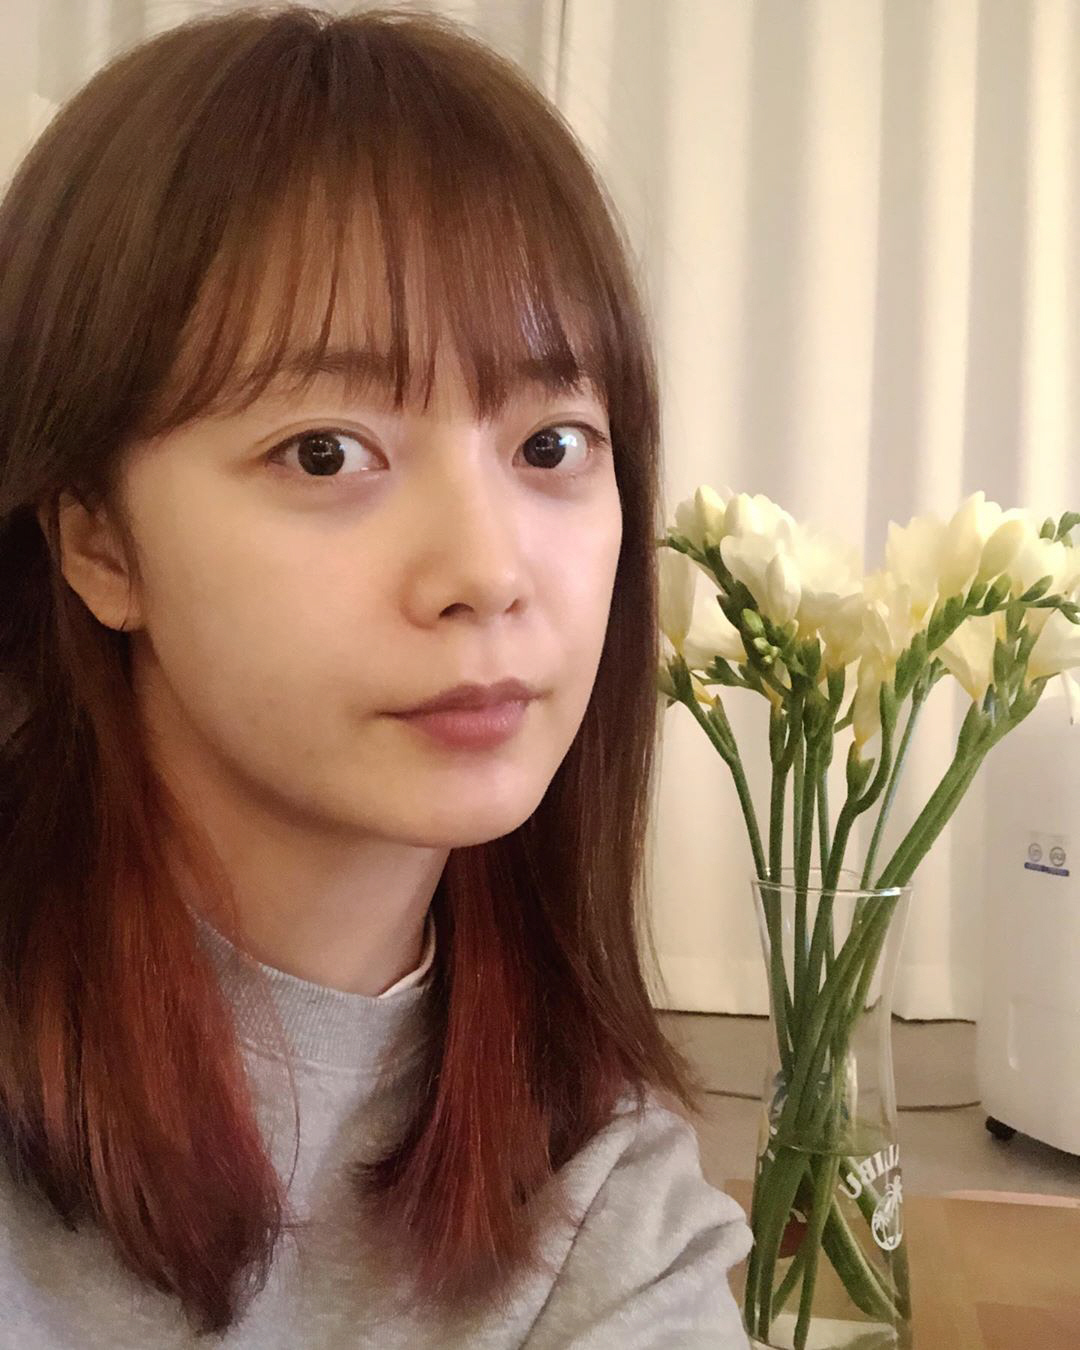 Actor Jeon So-min has been told of his recent break.Jeon So-min posted a picture of a vase and a stand with an article entitled Thank you for everything on his Instagram on the 21st.Jeon So-min has been briefly suspended for health issues recently.Jeon So-min felt more than condition during the Running Man shooting on the 30th of last month, and he was treated for the hospital and will concentrate on treatment and rest for about a month, the agency said.However, after the fact that Jeon So-mins brother was suffering from the family for the time being, he was saddened.Meanwhile, Jeon So-min made his debut in 2004 as a sitcom Miracle and appeared in dramas Aurora Princess, One percent of something, Cross and Top Star Yubaeki.Since 2017, he has appeared on SBS Running Man and has been loved by many people for boasting outstanding fun sense.